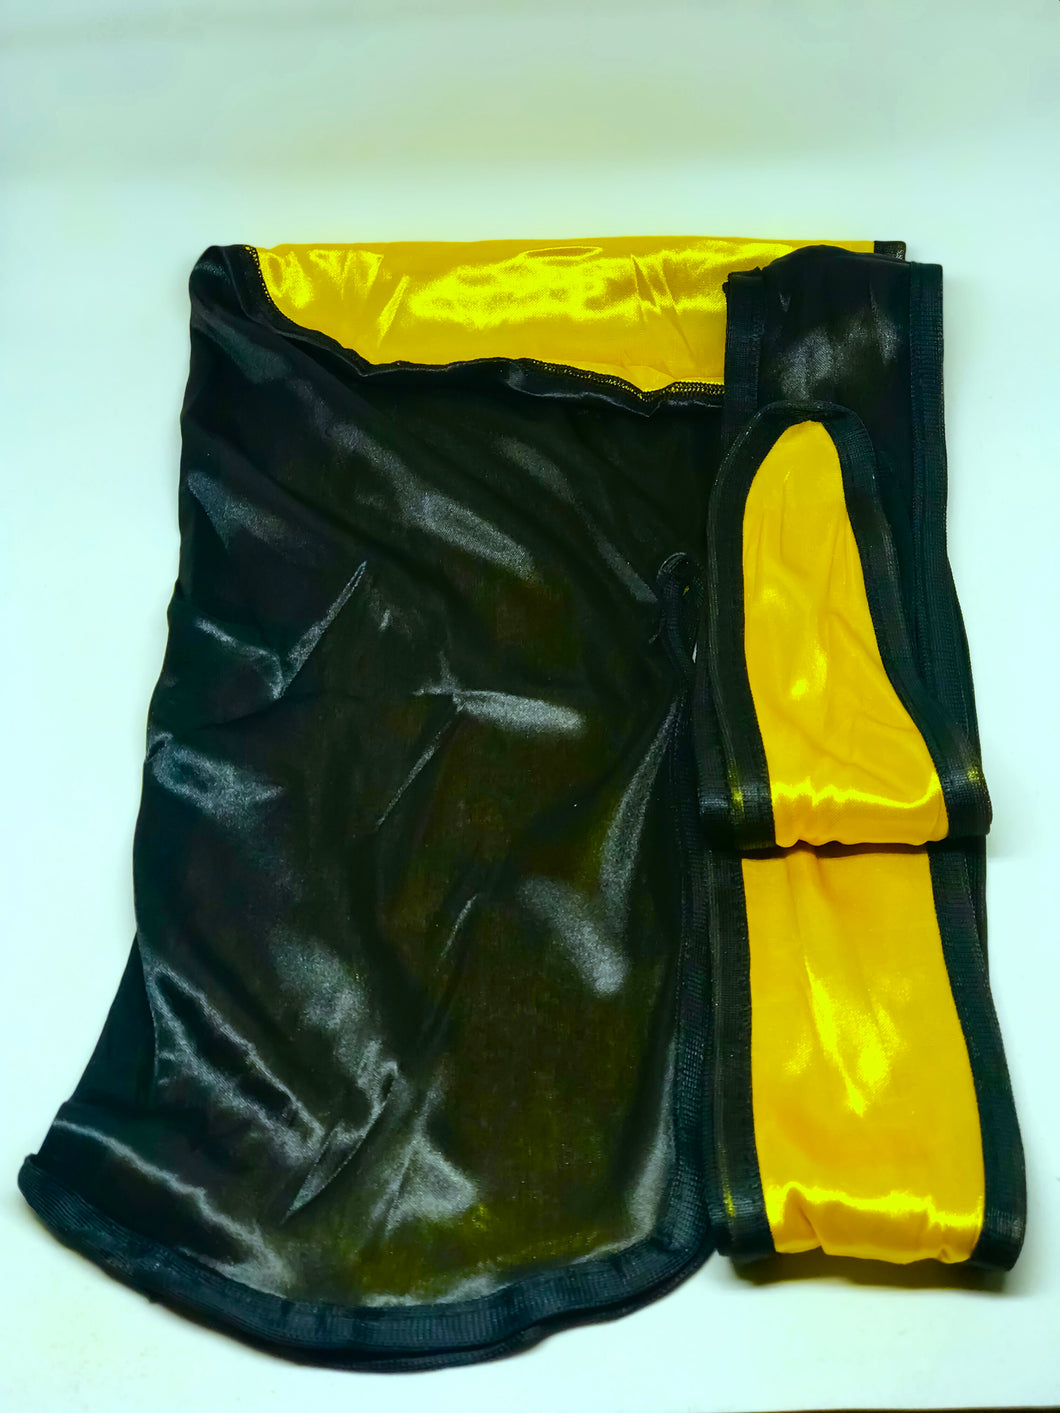 Rimix *PATENT PENDING* Two Tone Silky Durag **Limited Edition** - Black/Egyptian Gold